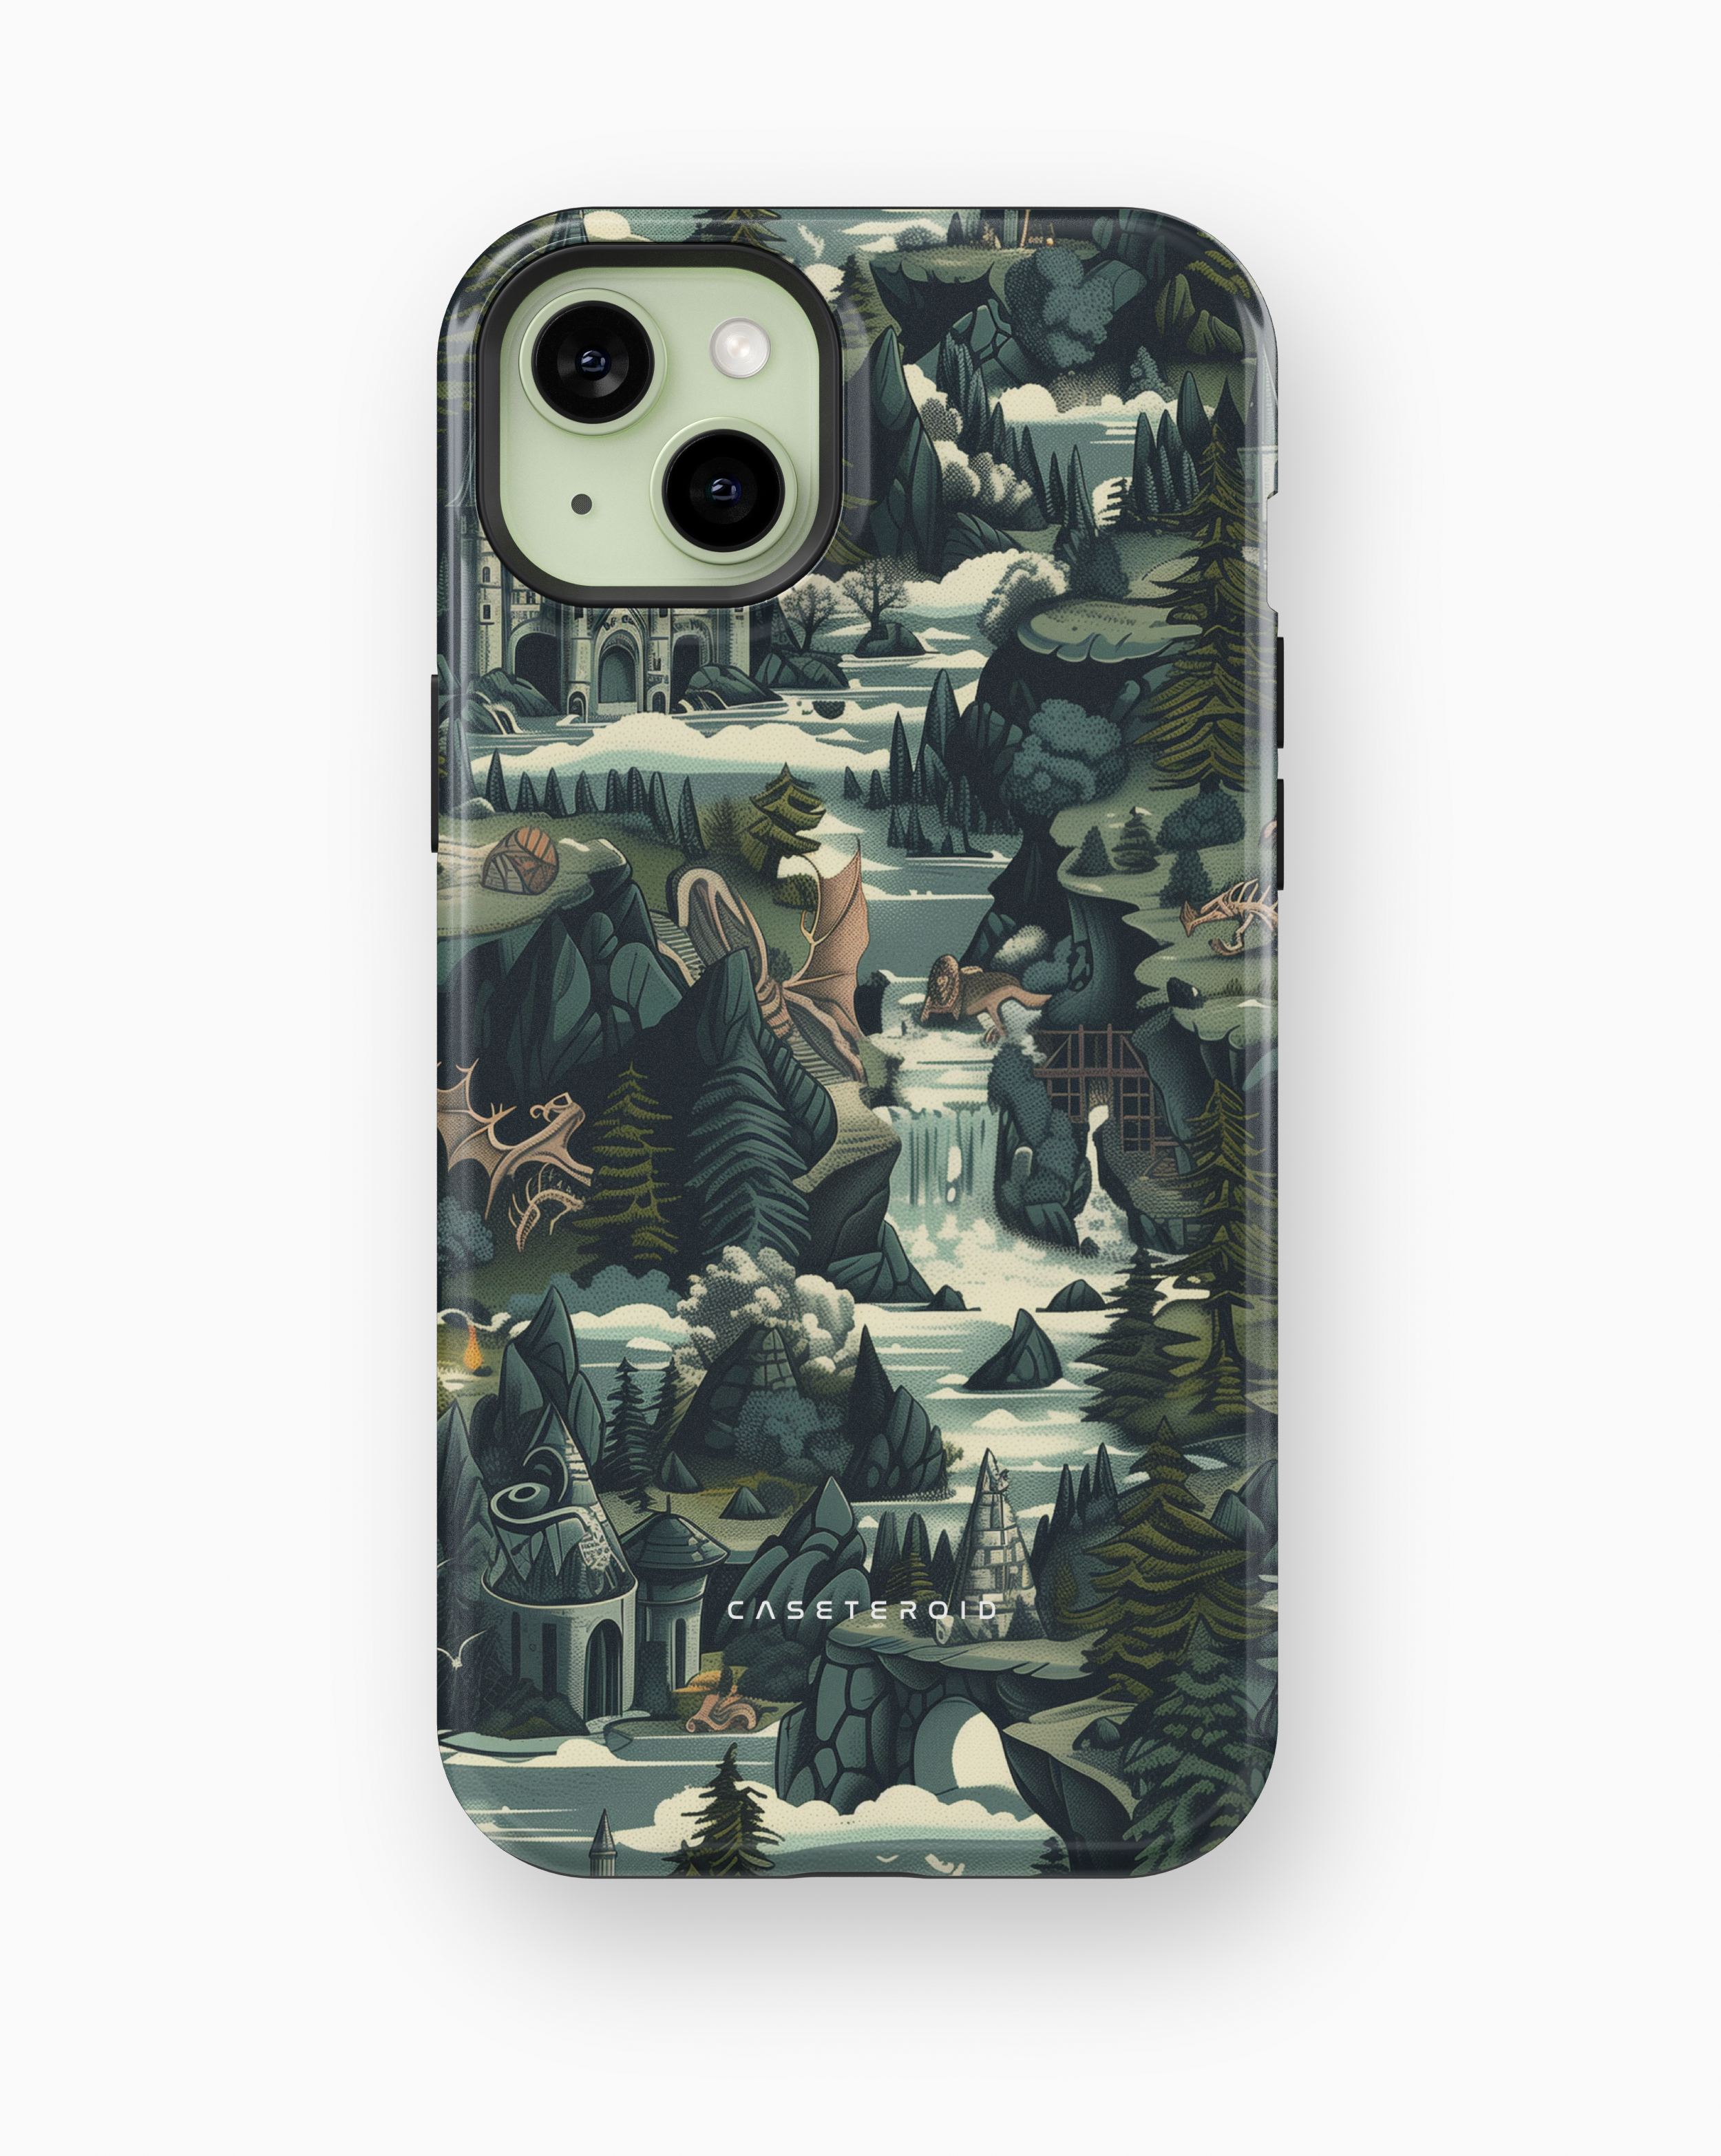 iPhone Tough Case - Mythical Kingdom Tapestry - CASETEROID